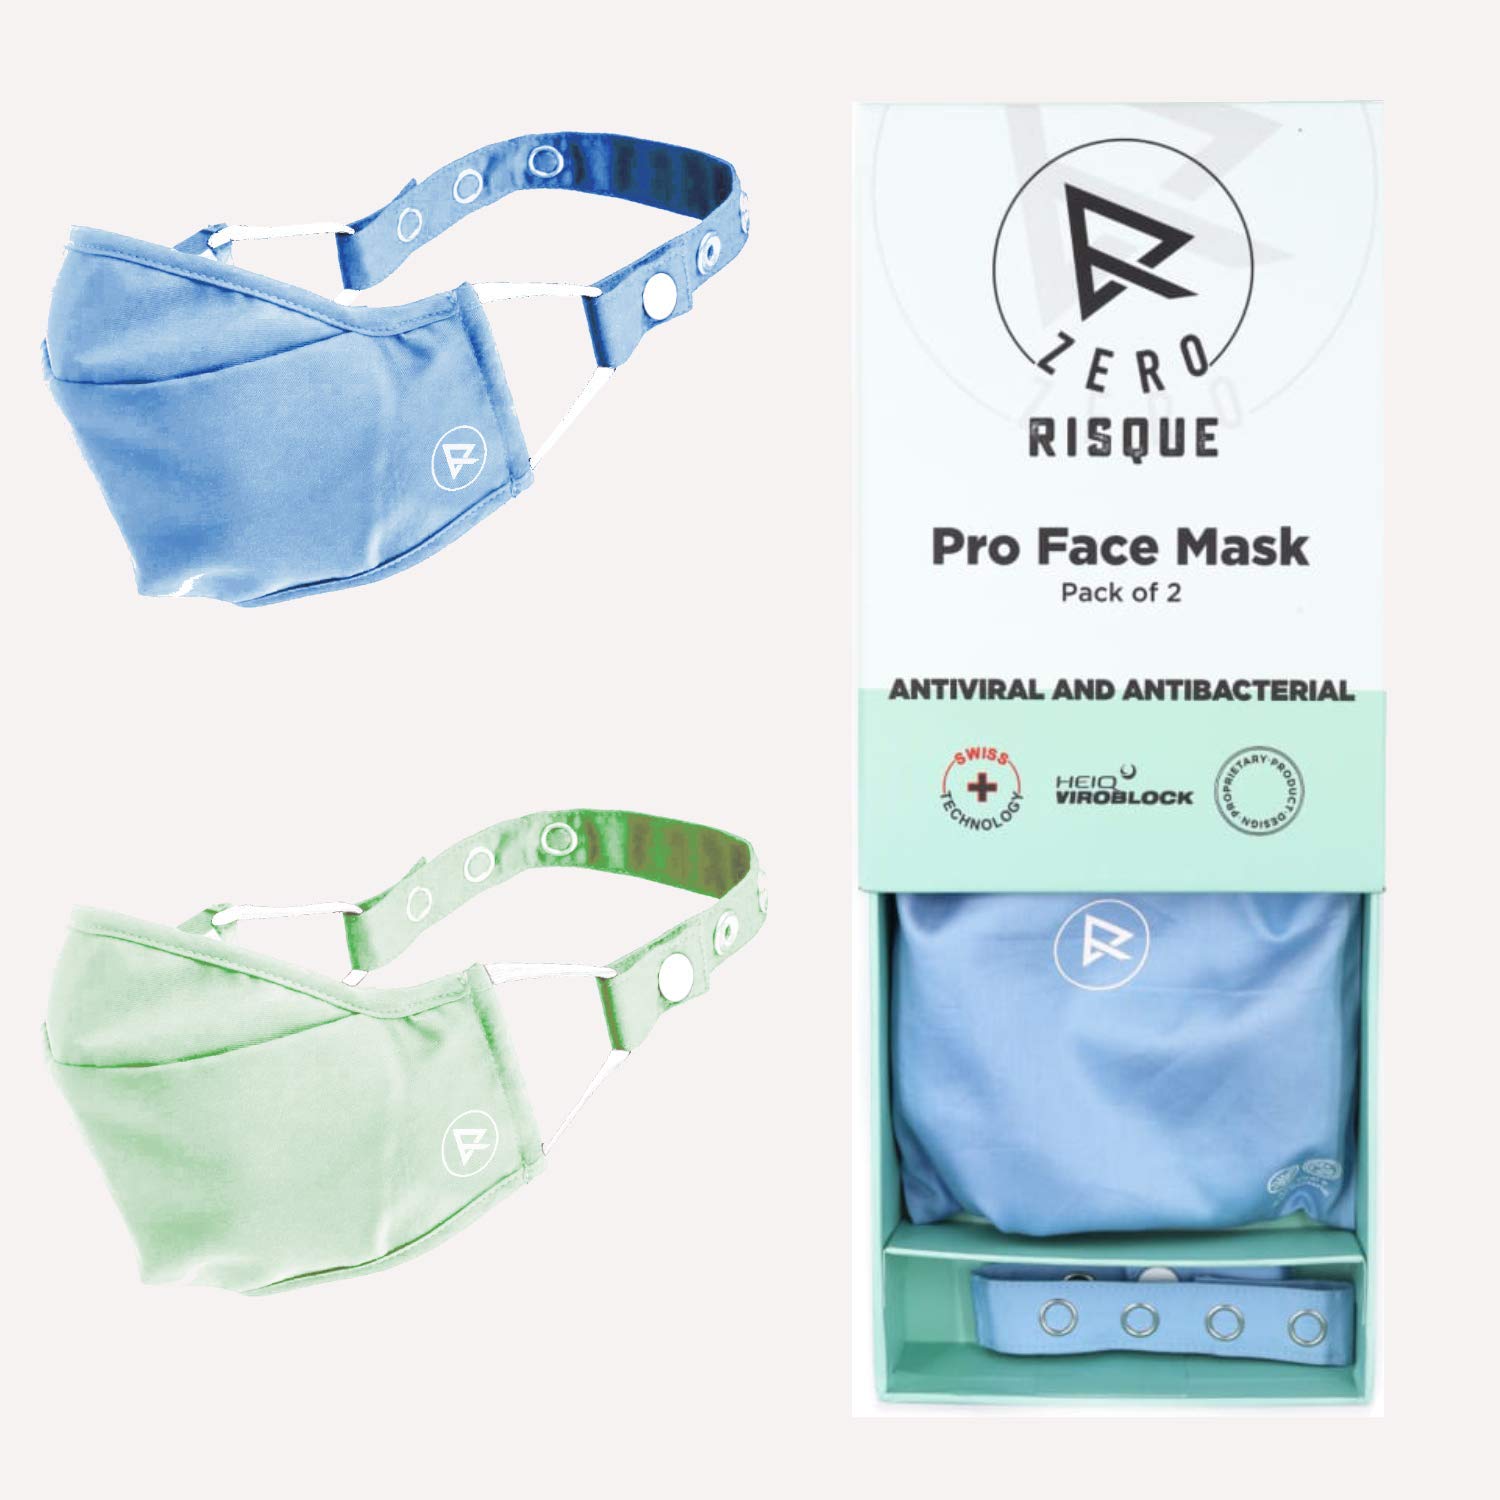 N95 mask online - Risque Zero Pro washable and reusable Face Mask for women with Headband Adjuster Pack of 2 |Anti - Viral & Anti - Bacterial Comfort And Protection